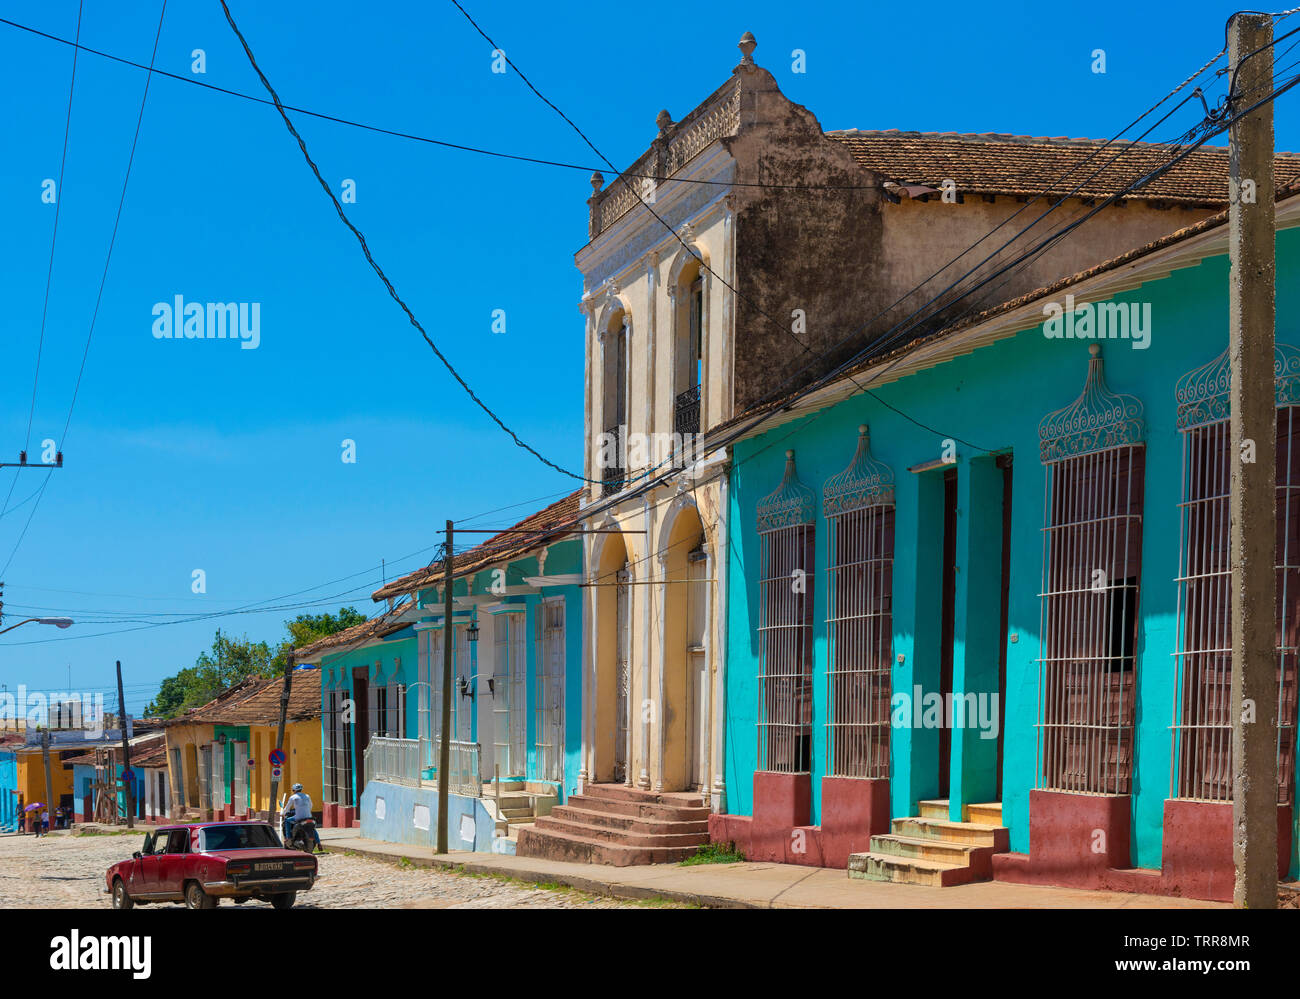 One of the colourful main streets in the town of Trinidad, Sancti Spiritus Province, Cuba, Caribbean Stock Photo